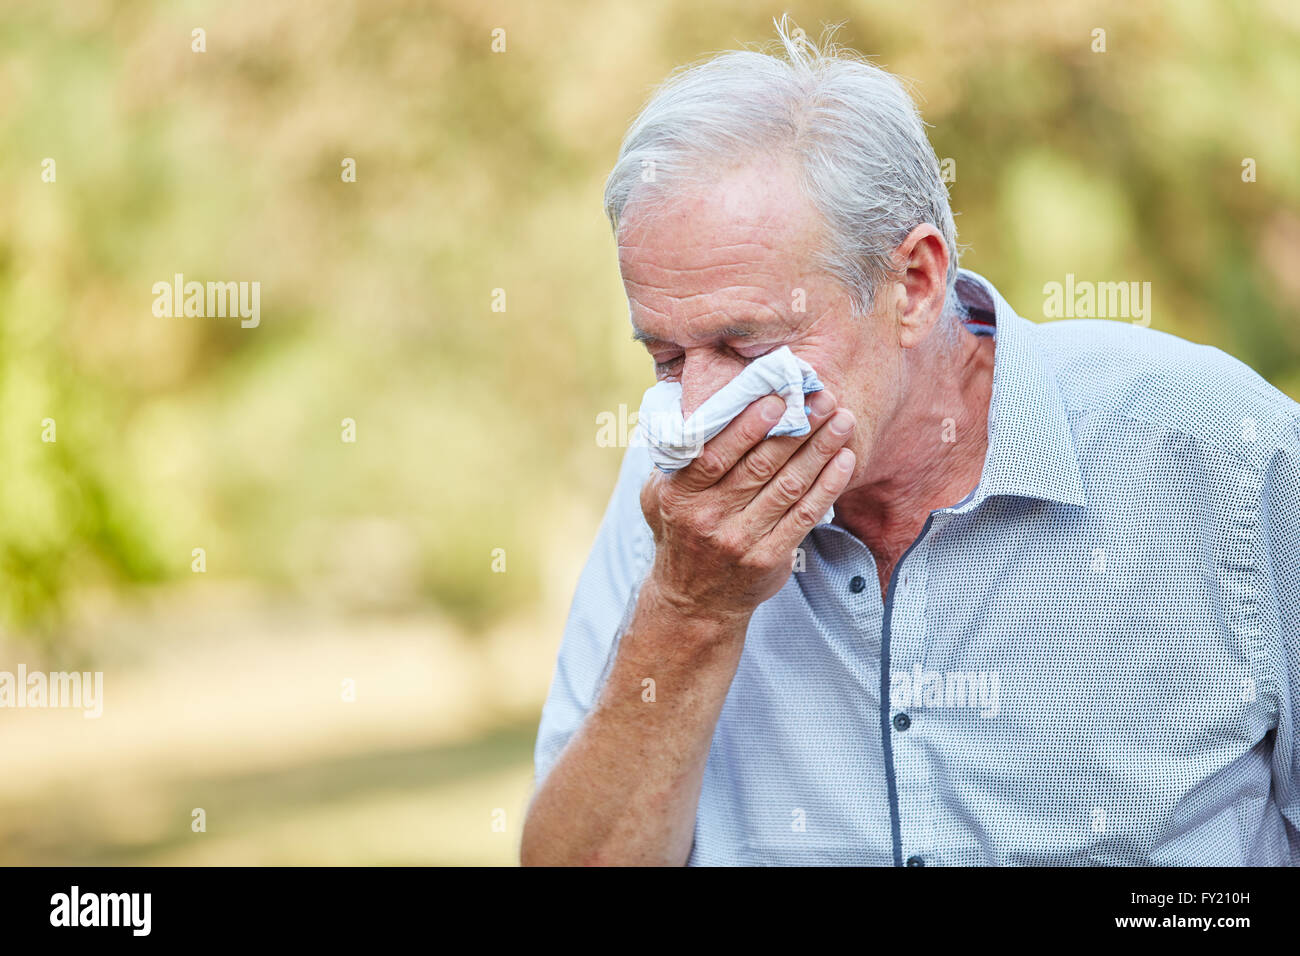 Old man with a cold using a tissue in the nature Stock Photo